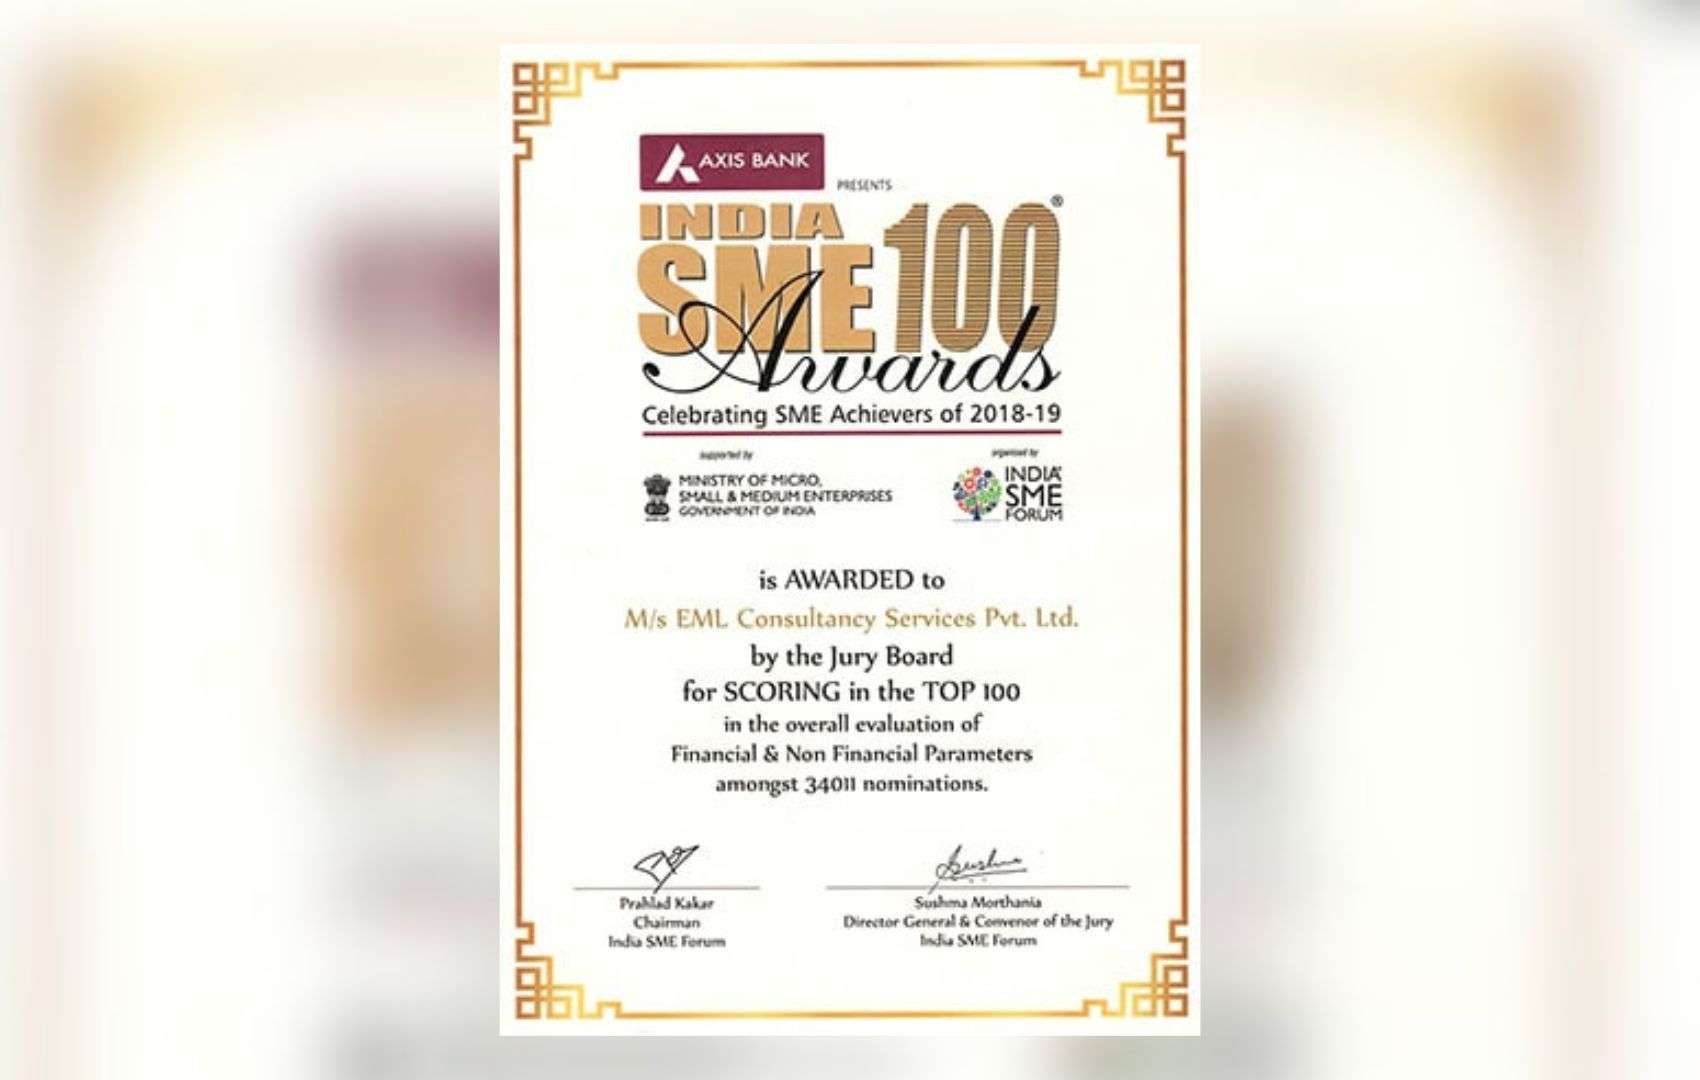 honored as a Top 100 recipient at the “India SME 100 Awards” for its outstanding provision